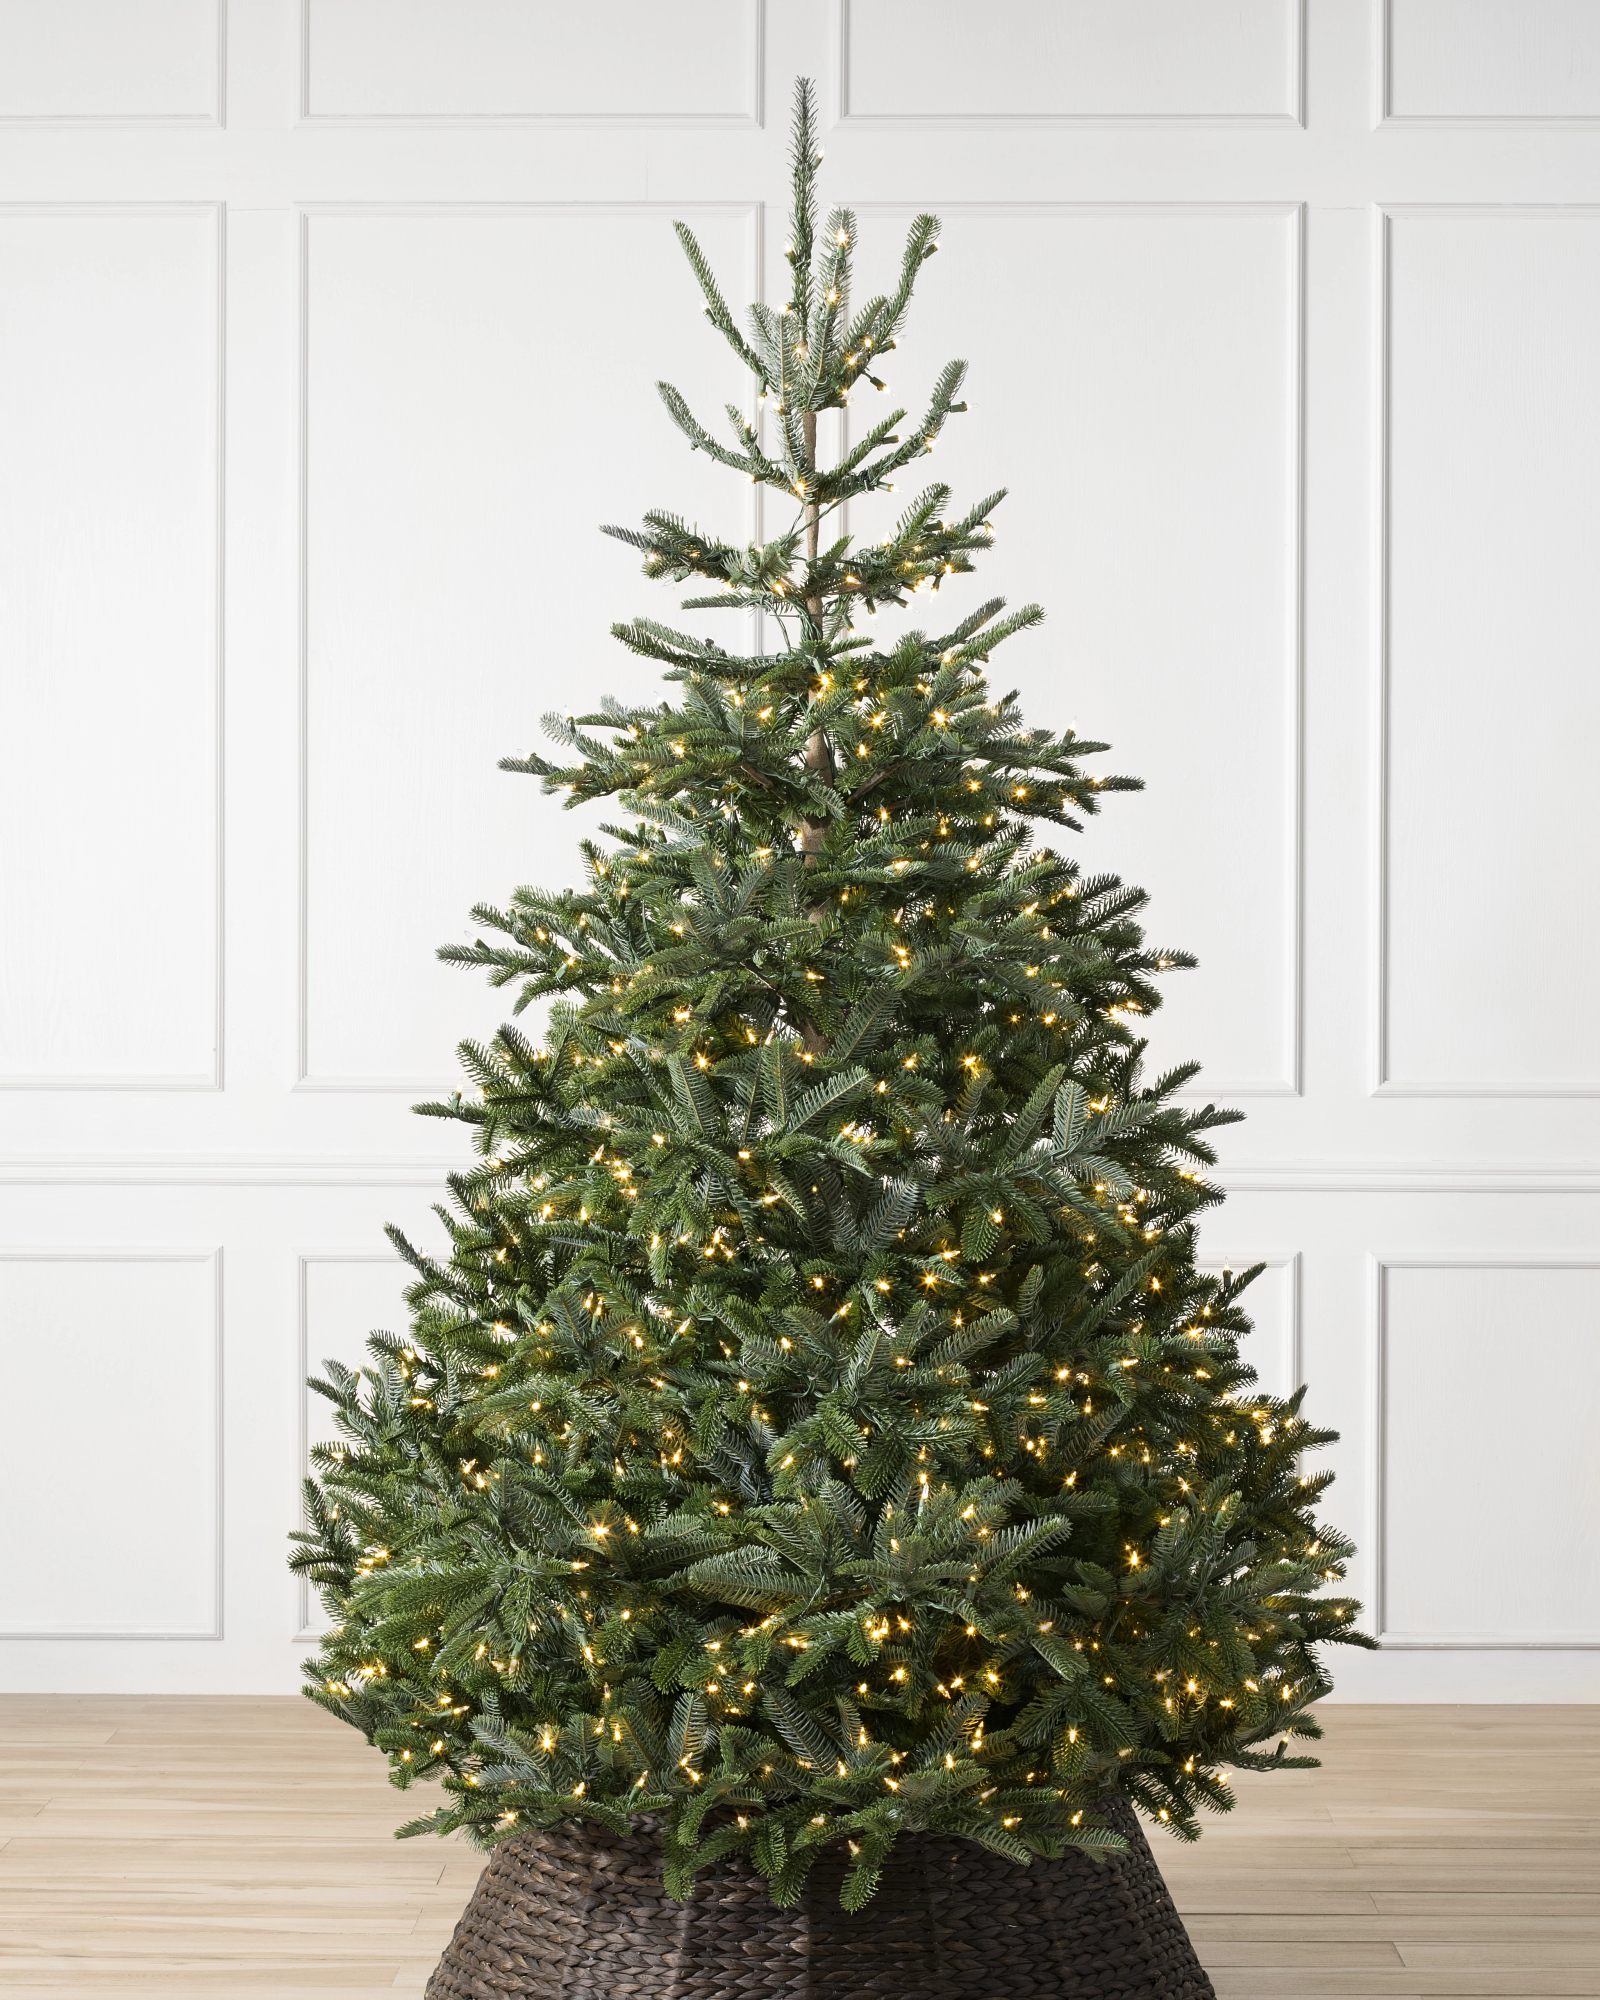 Realistic artificial Christmas tree from Balsam Hill